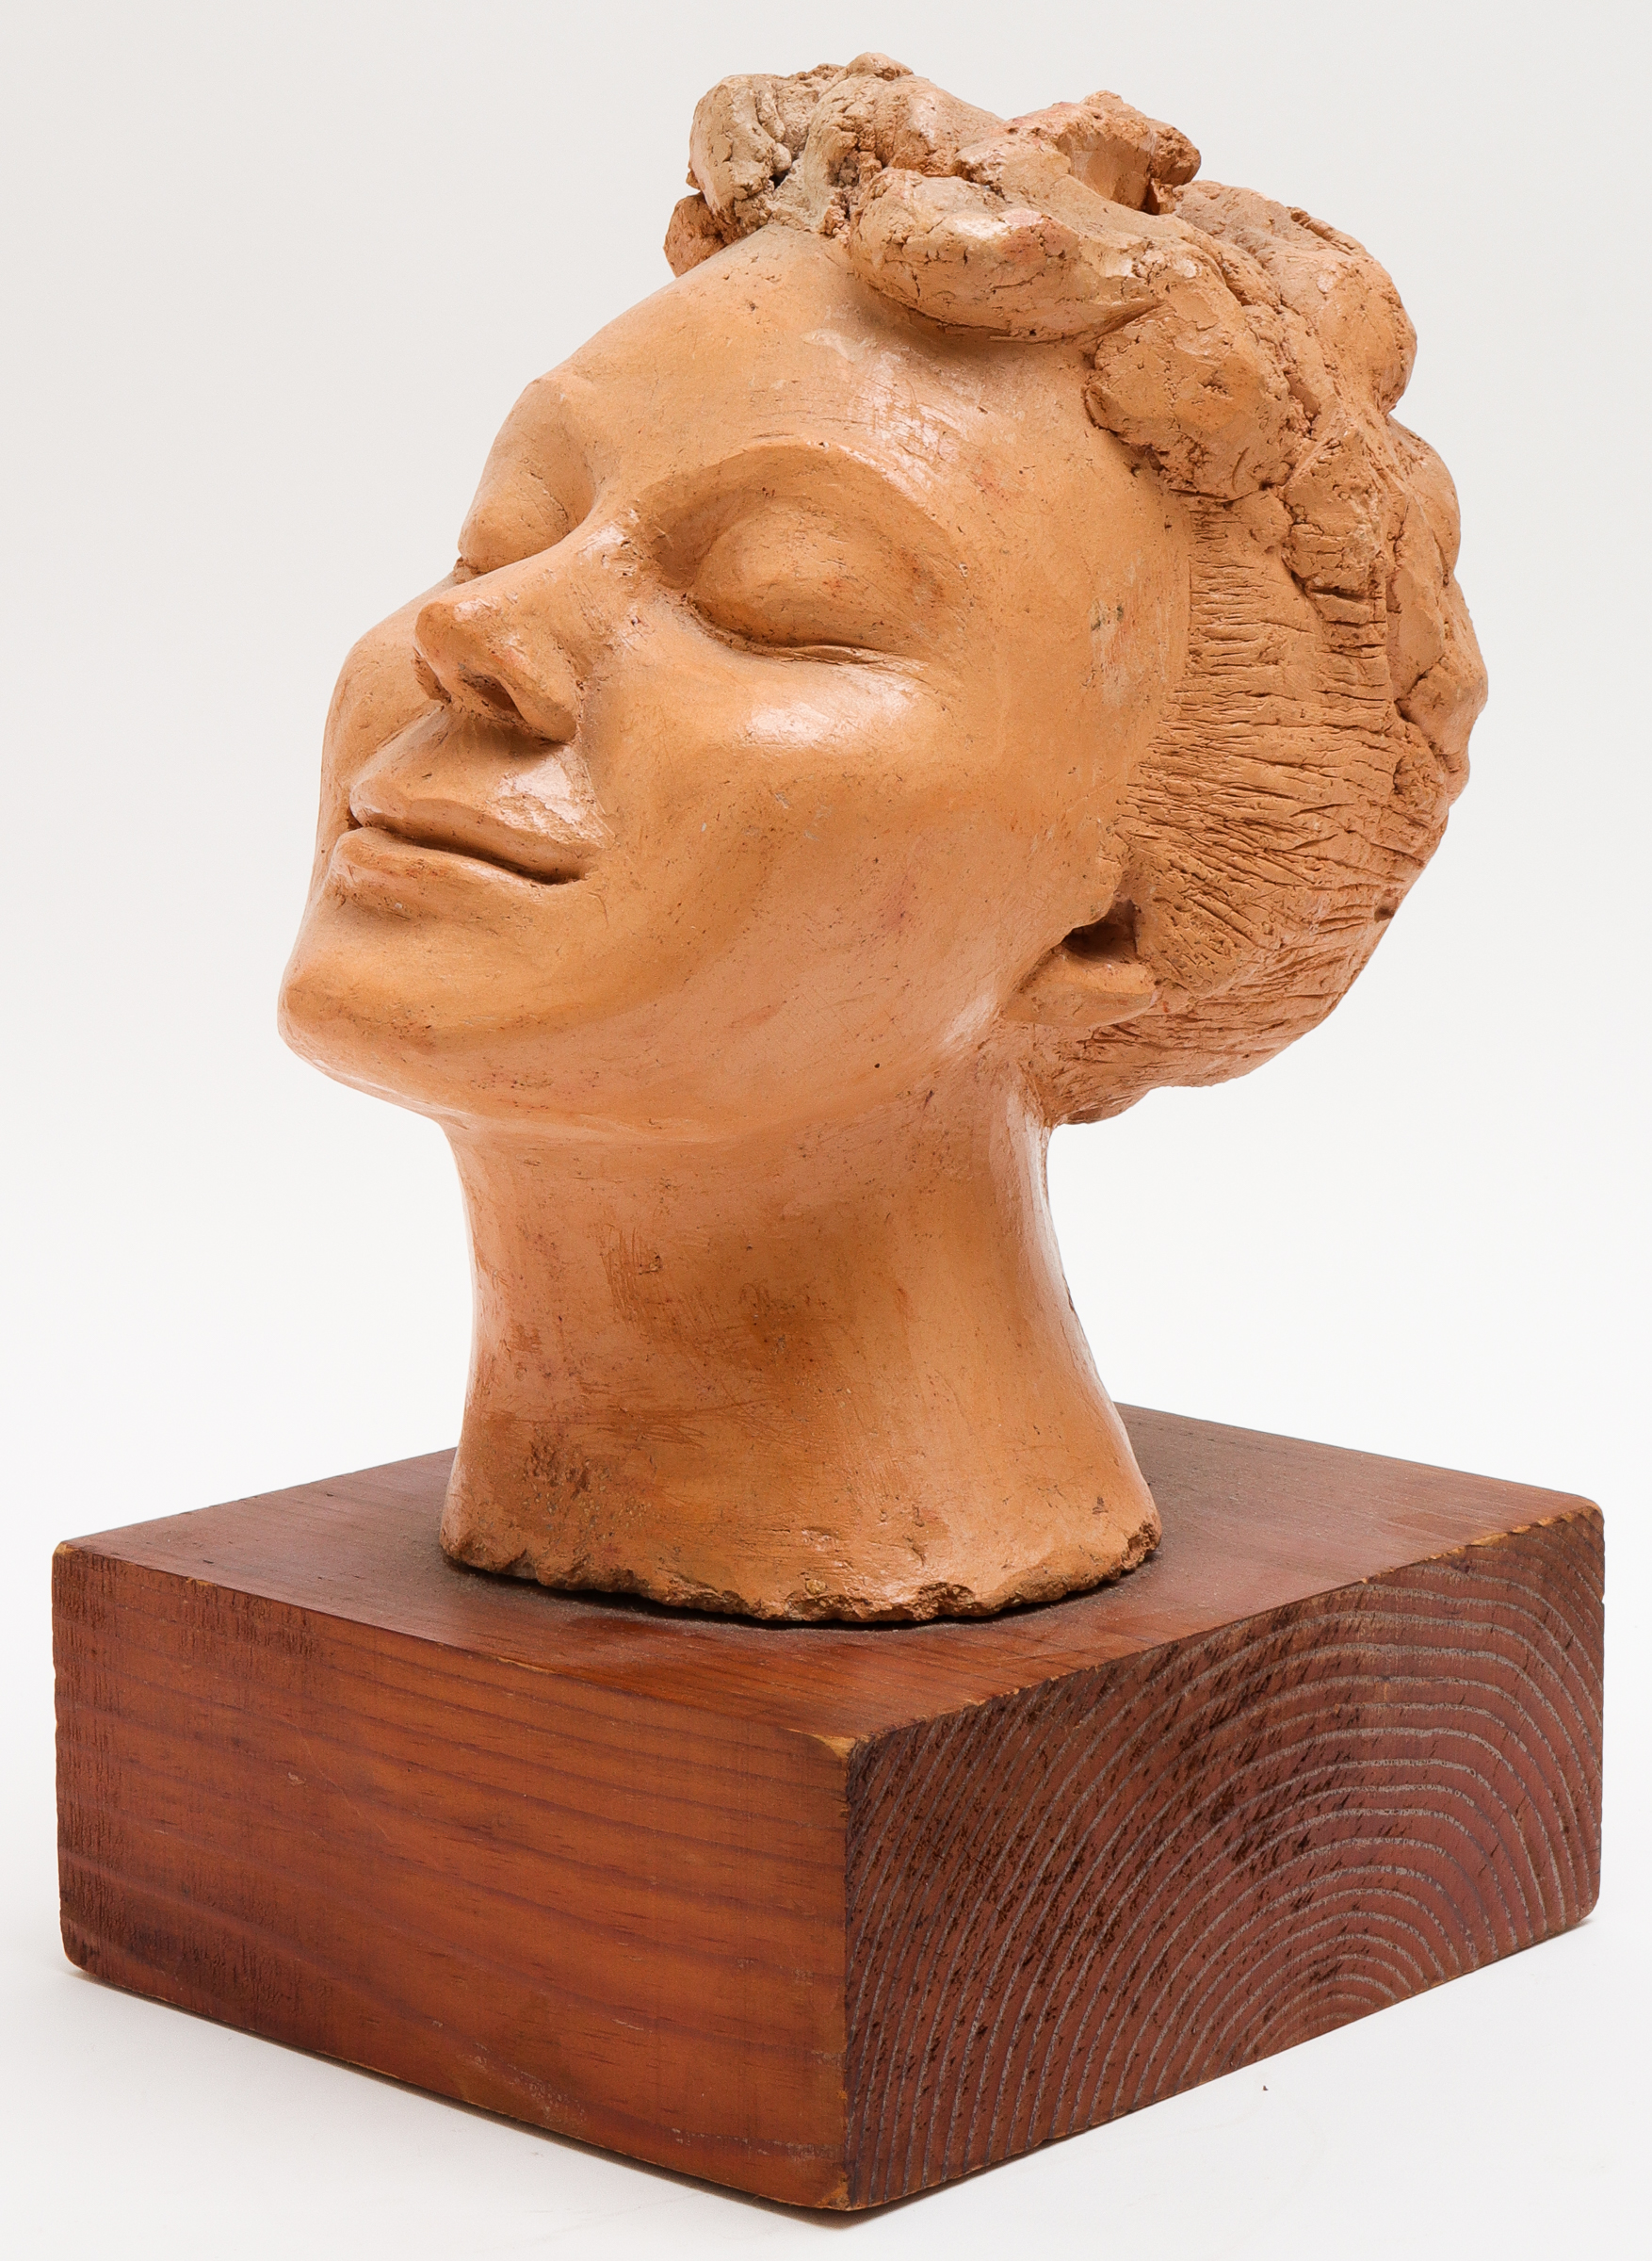 EPPY SIGNED CLAY SCULPTURE, HEAD